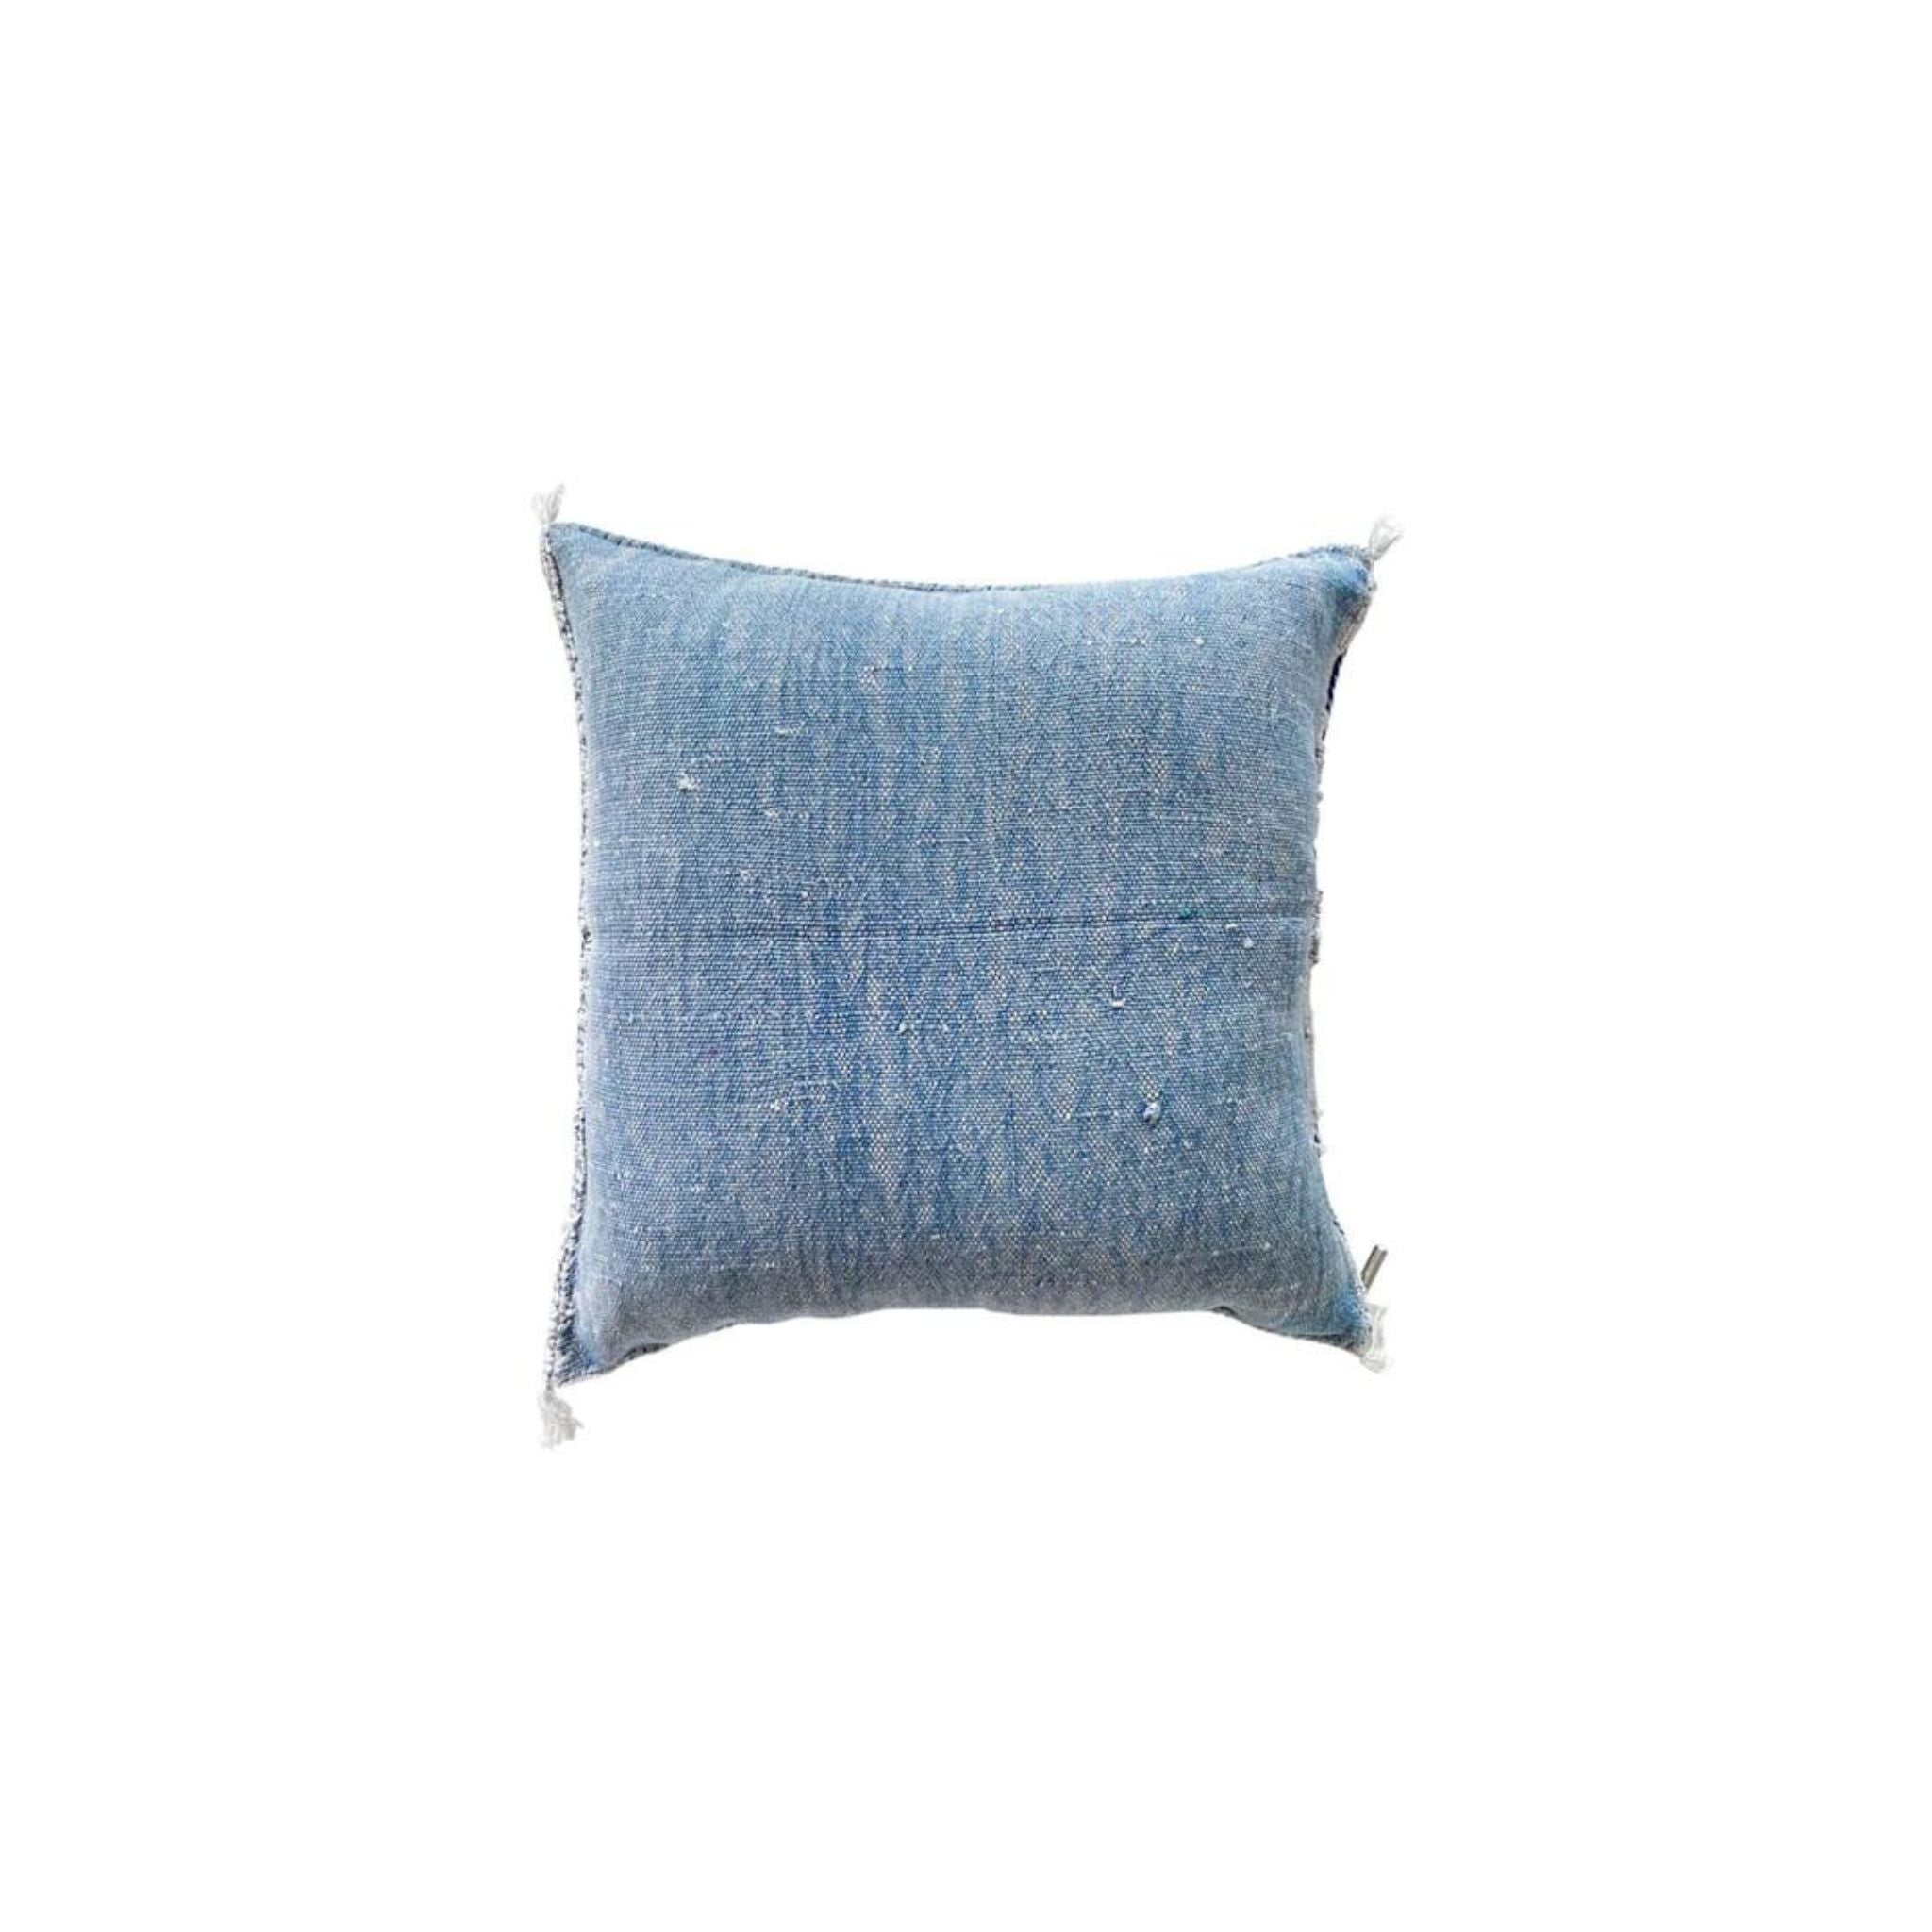 LEAH THROW PILLOW - Simply Elevated Home Furnishings 